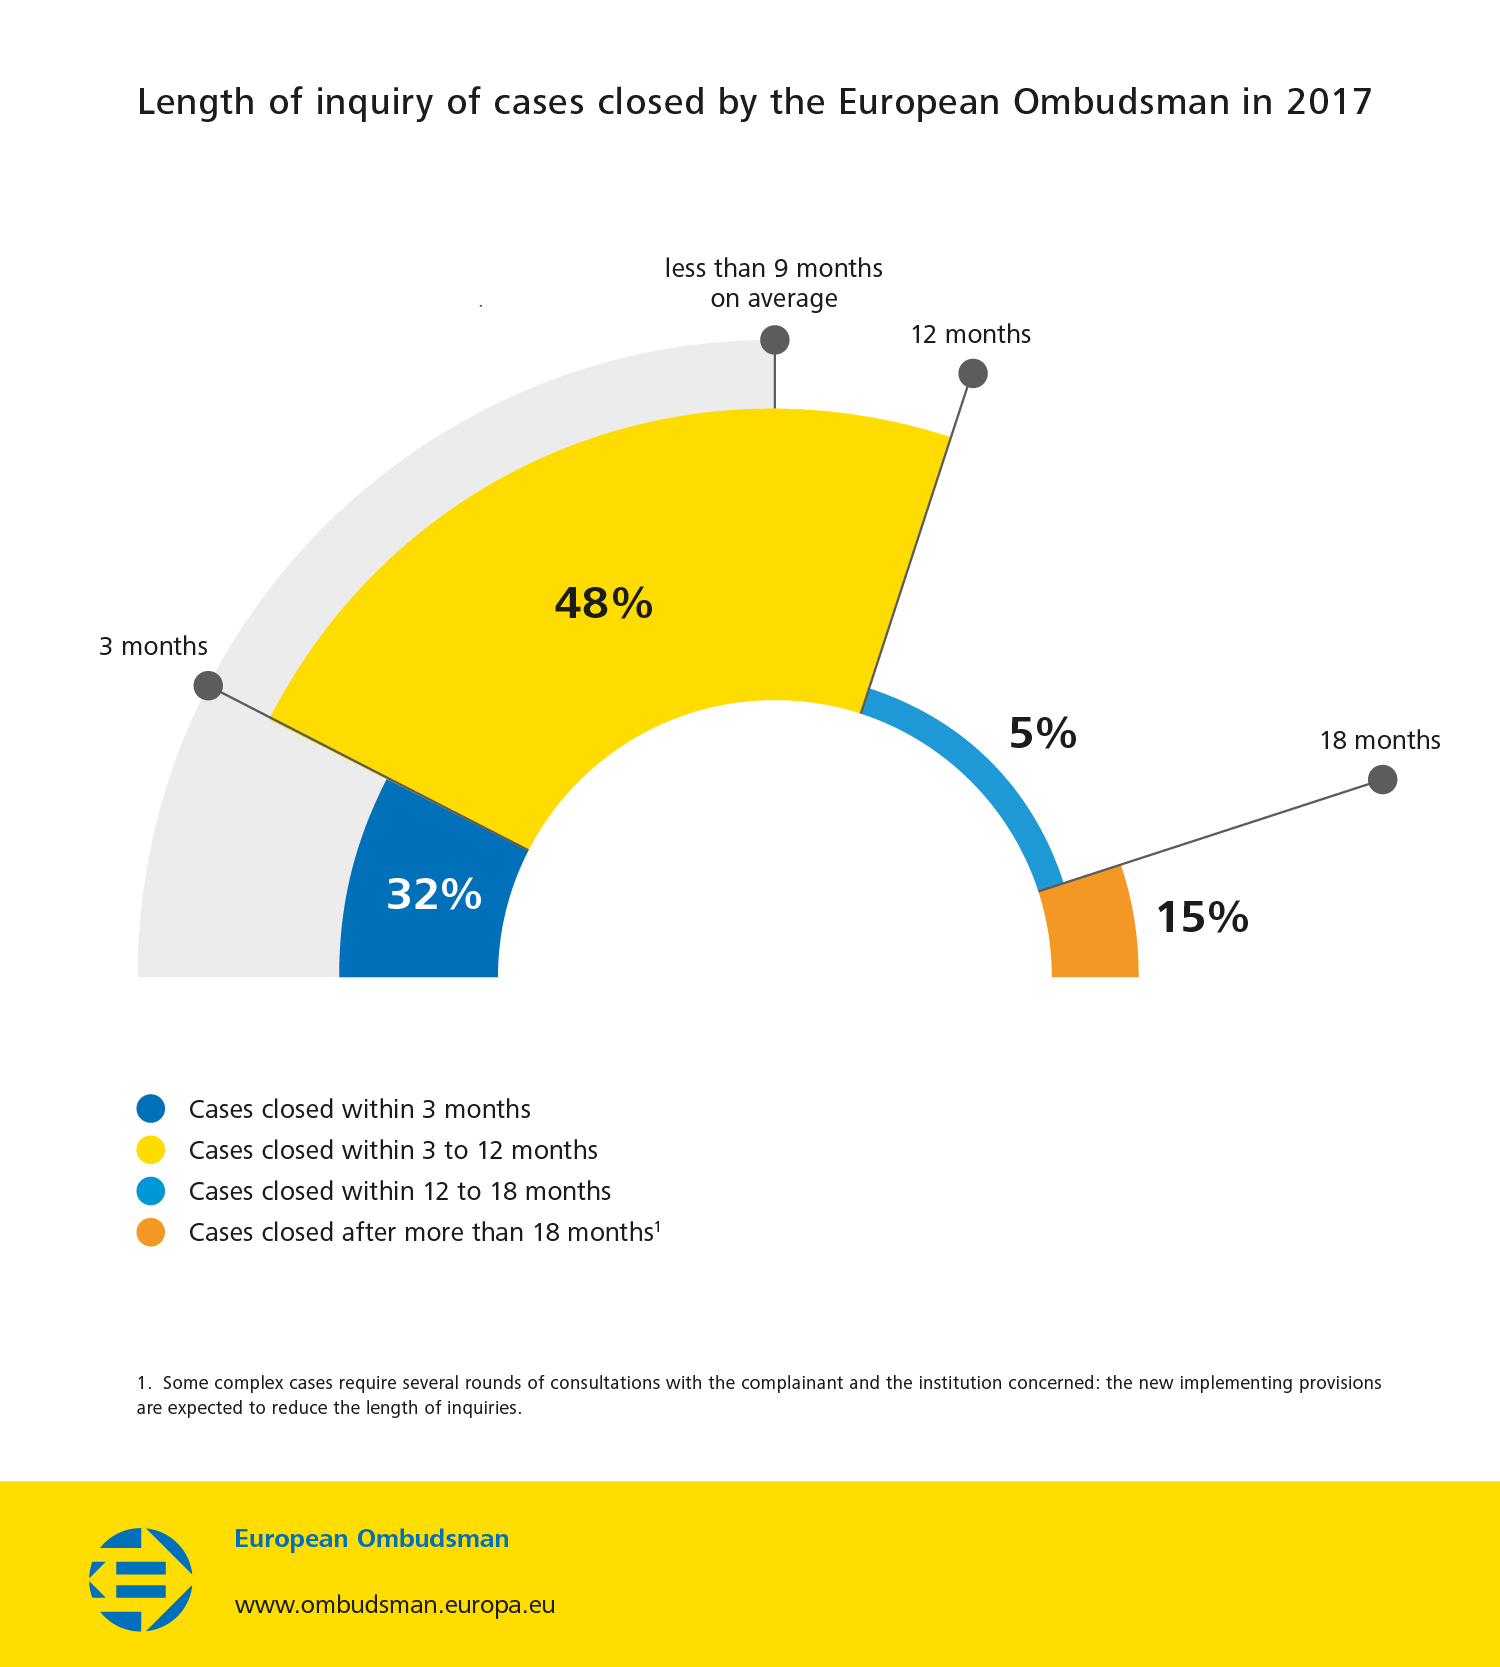 Length of inquiry of cases closed by the European Ombudsman in 2017